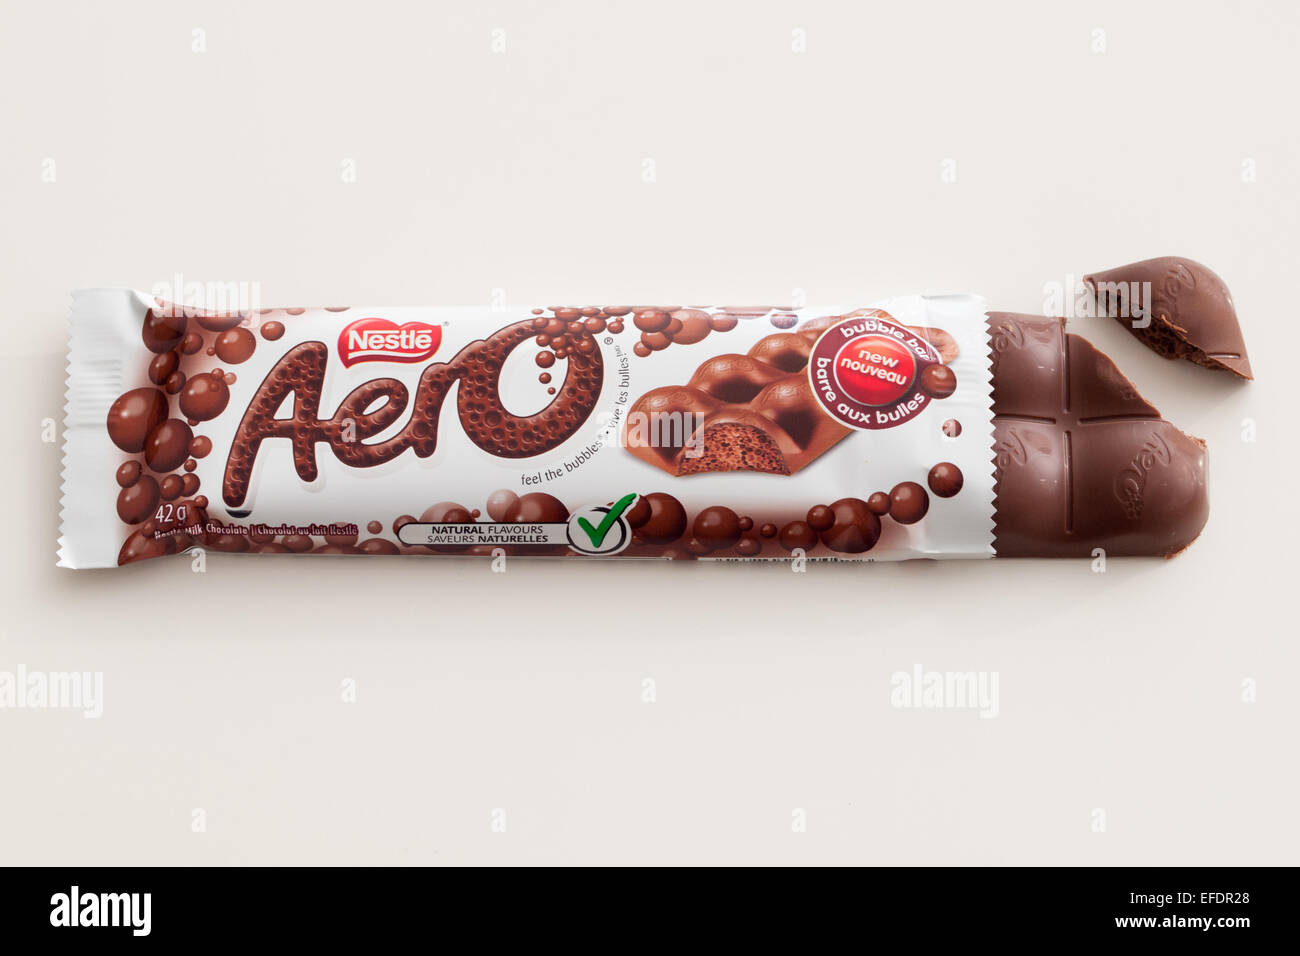 An Aero chocolate bar, produced by Nestlé.  Canadian packaging shown. Stock Photo